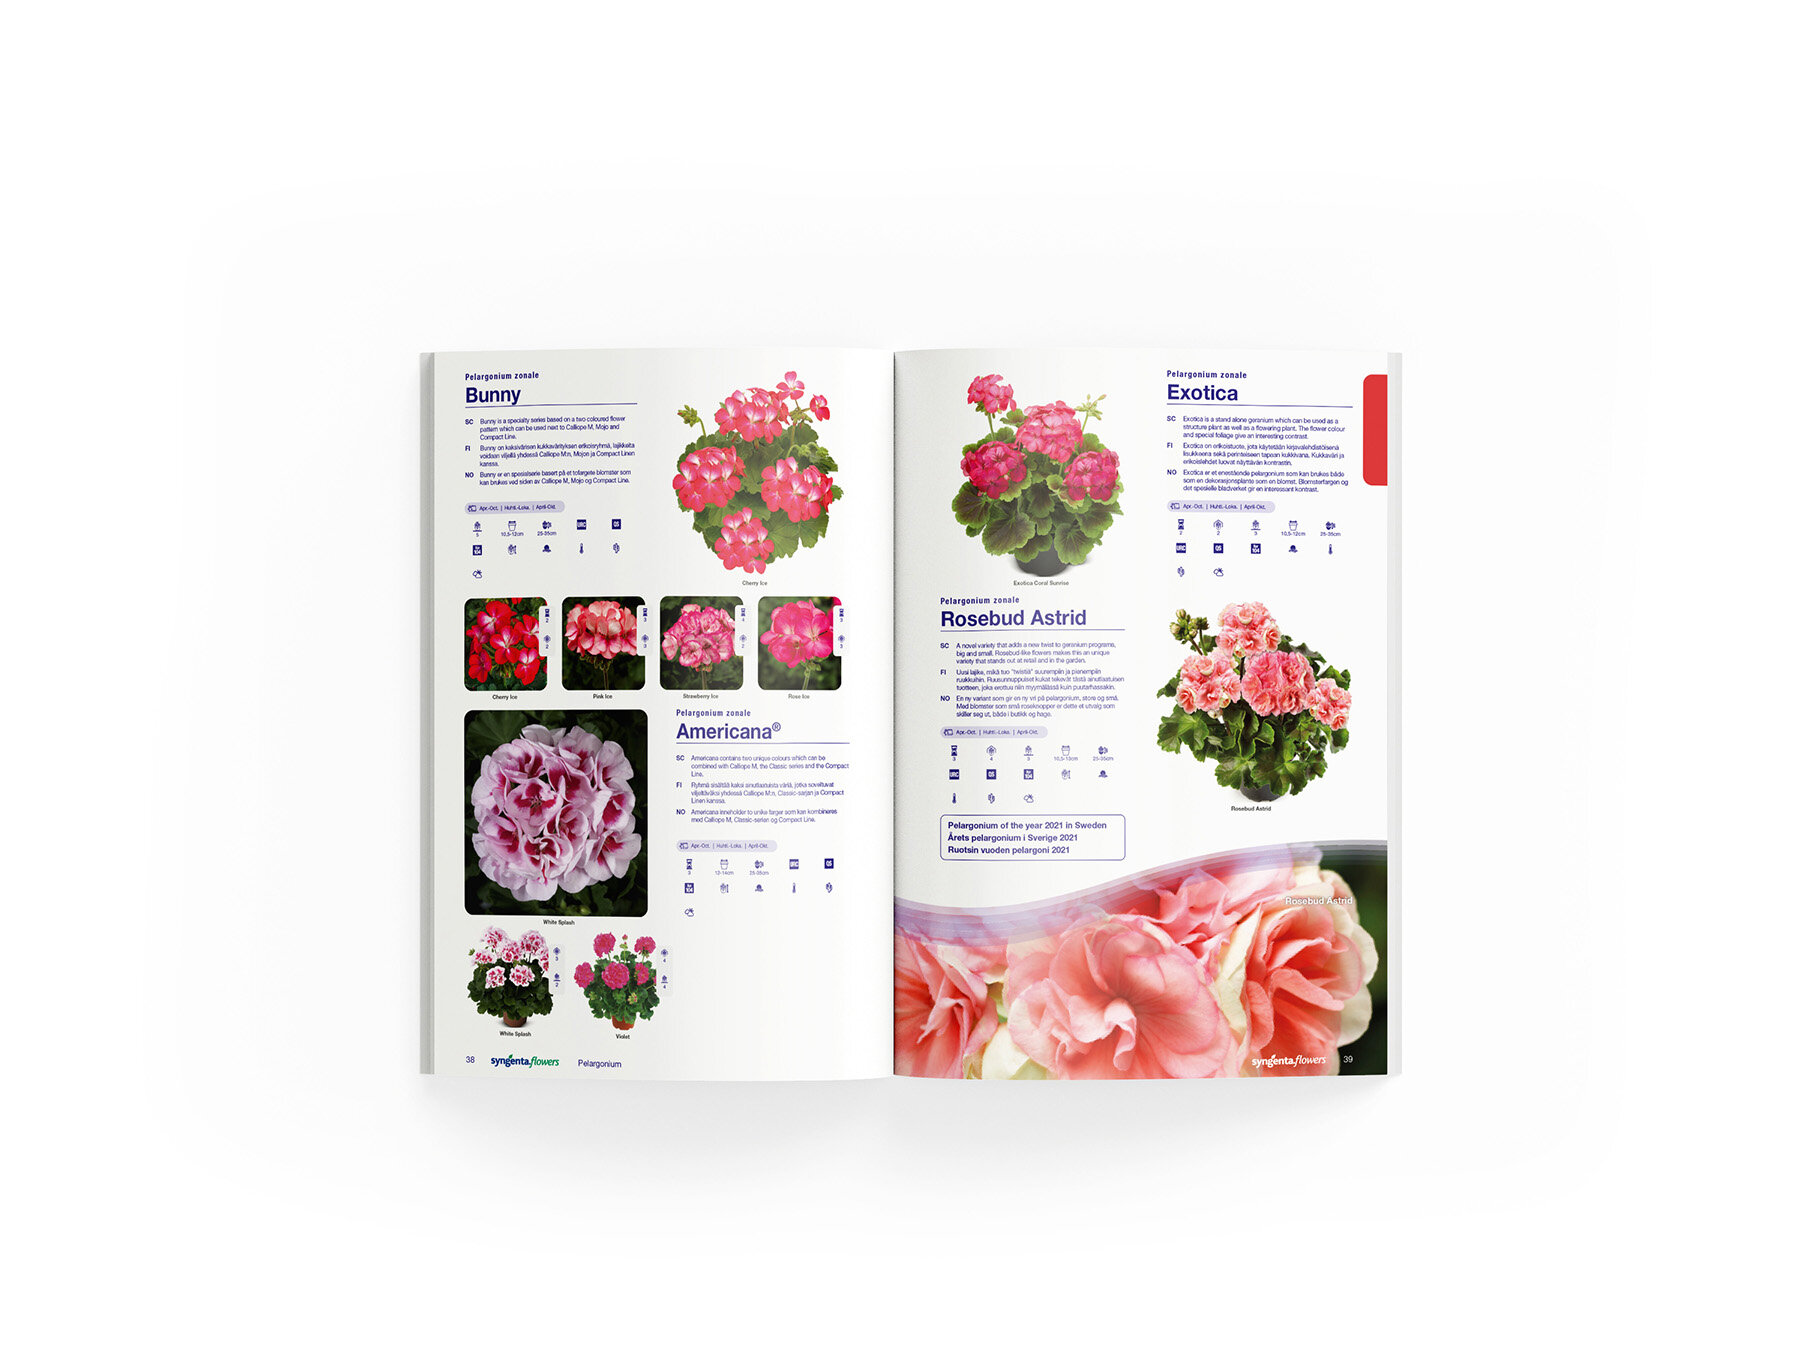 Syngenta Flowers catalog Annuals Product page.jpg